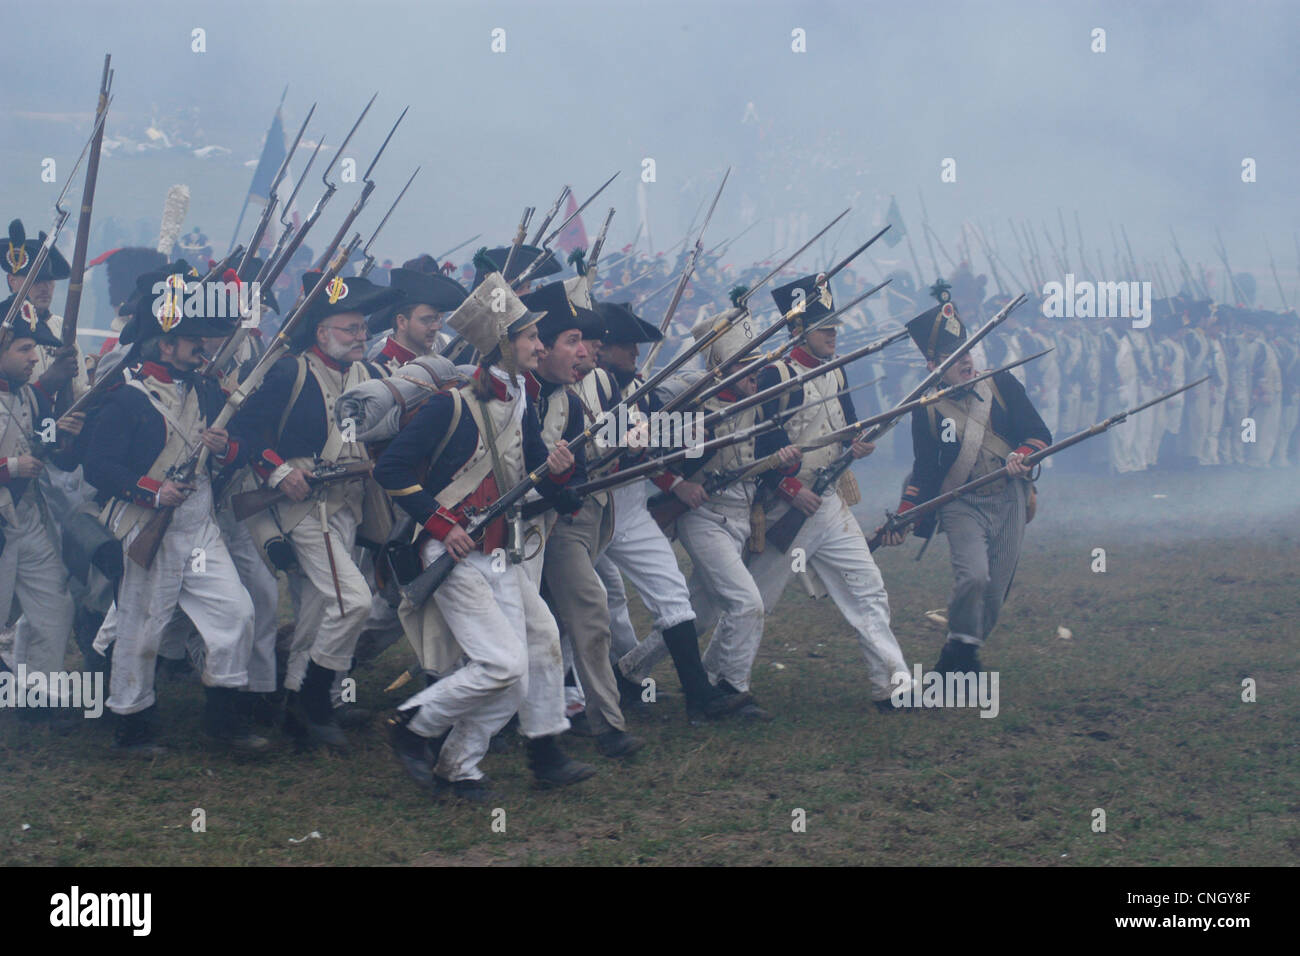 French troops. Re-enactment of the Battle of Austerlitz (1805) at Santon Hill near the village of Tvarozna, Czech Republic. Stock Photo